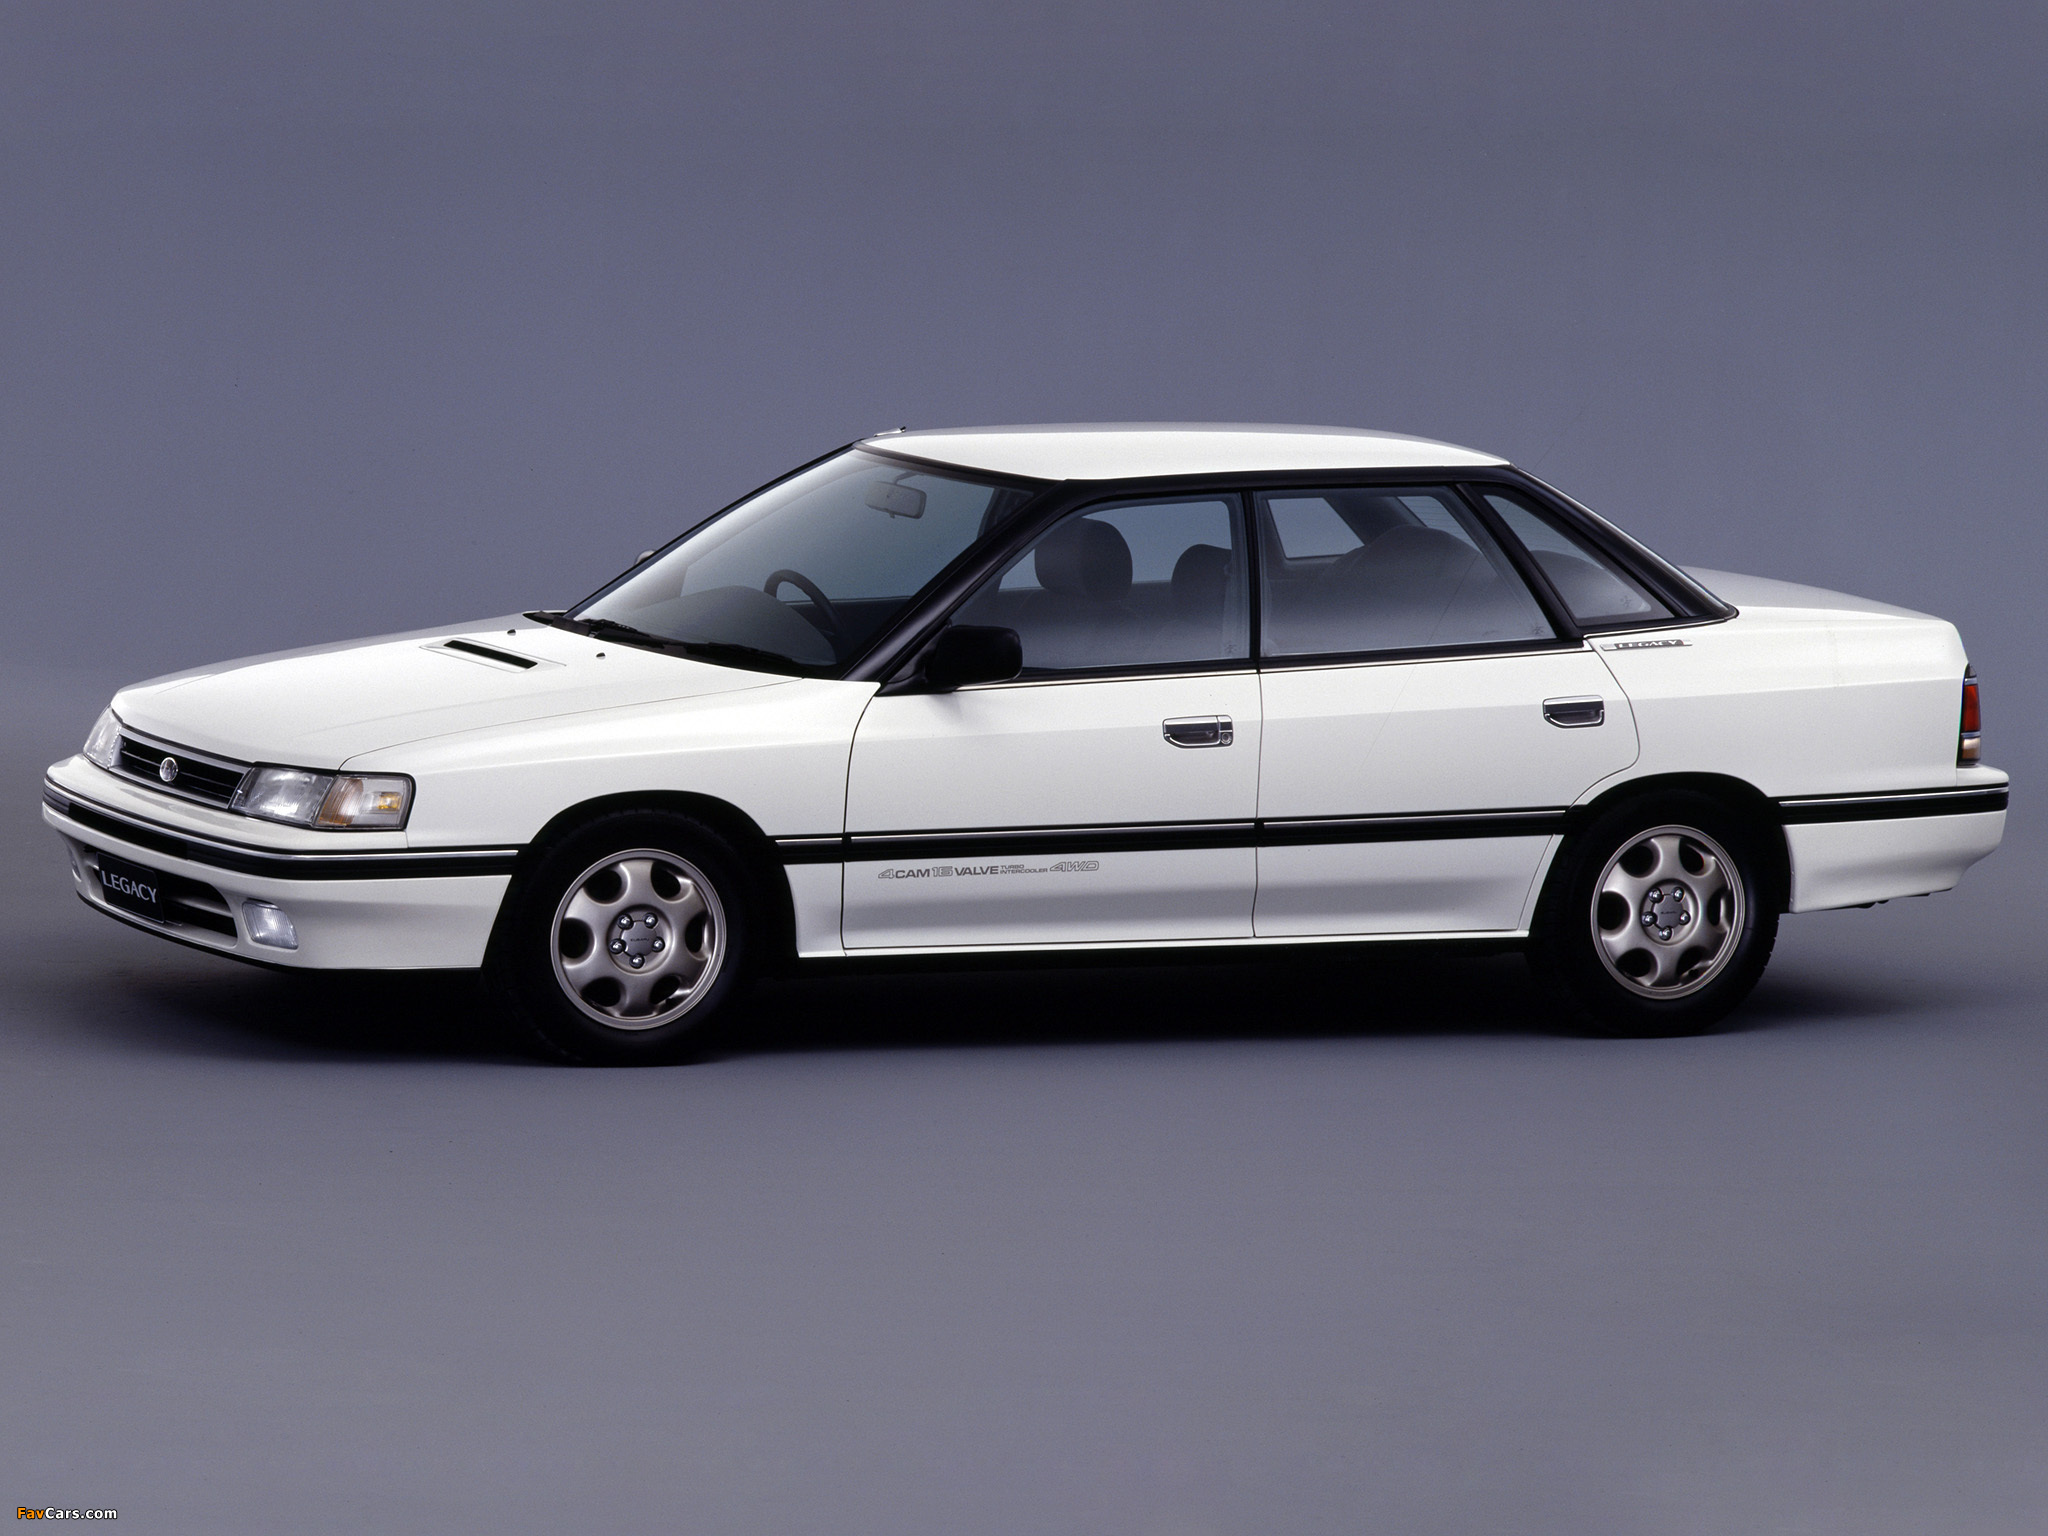 Images of Subaru Legacy 2.0 RS Type R (BC) 198991 (2048x1536)